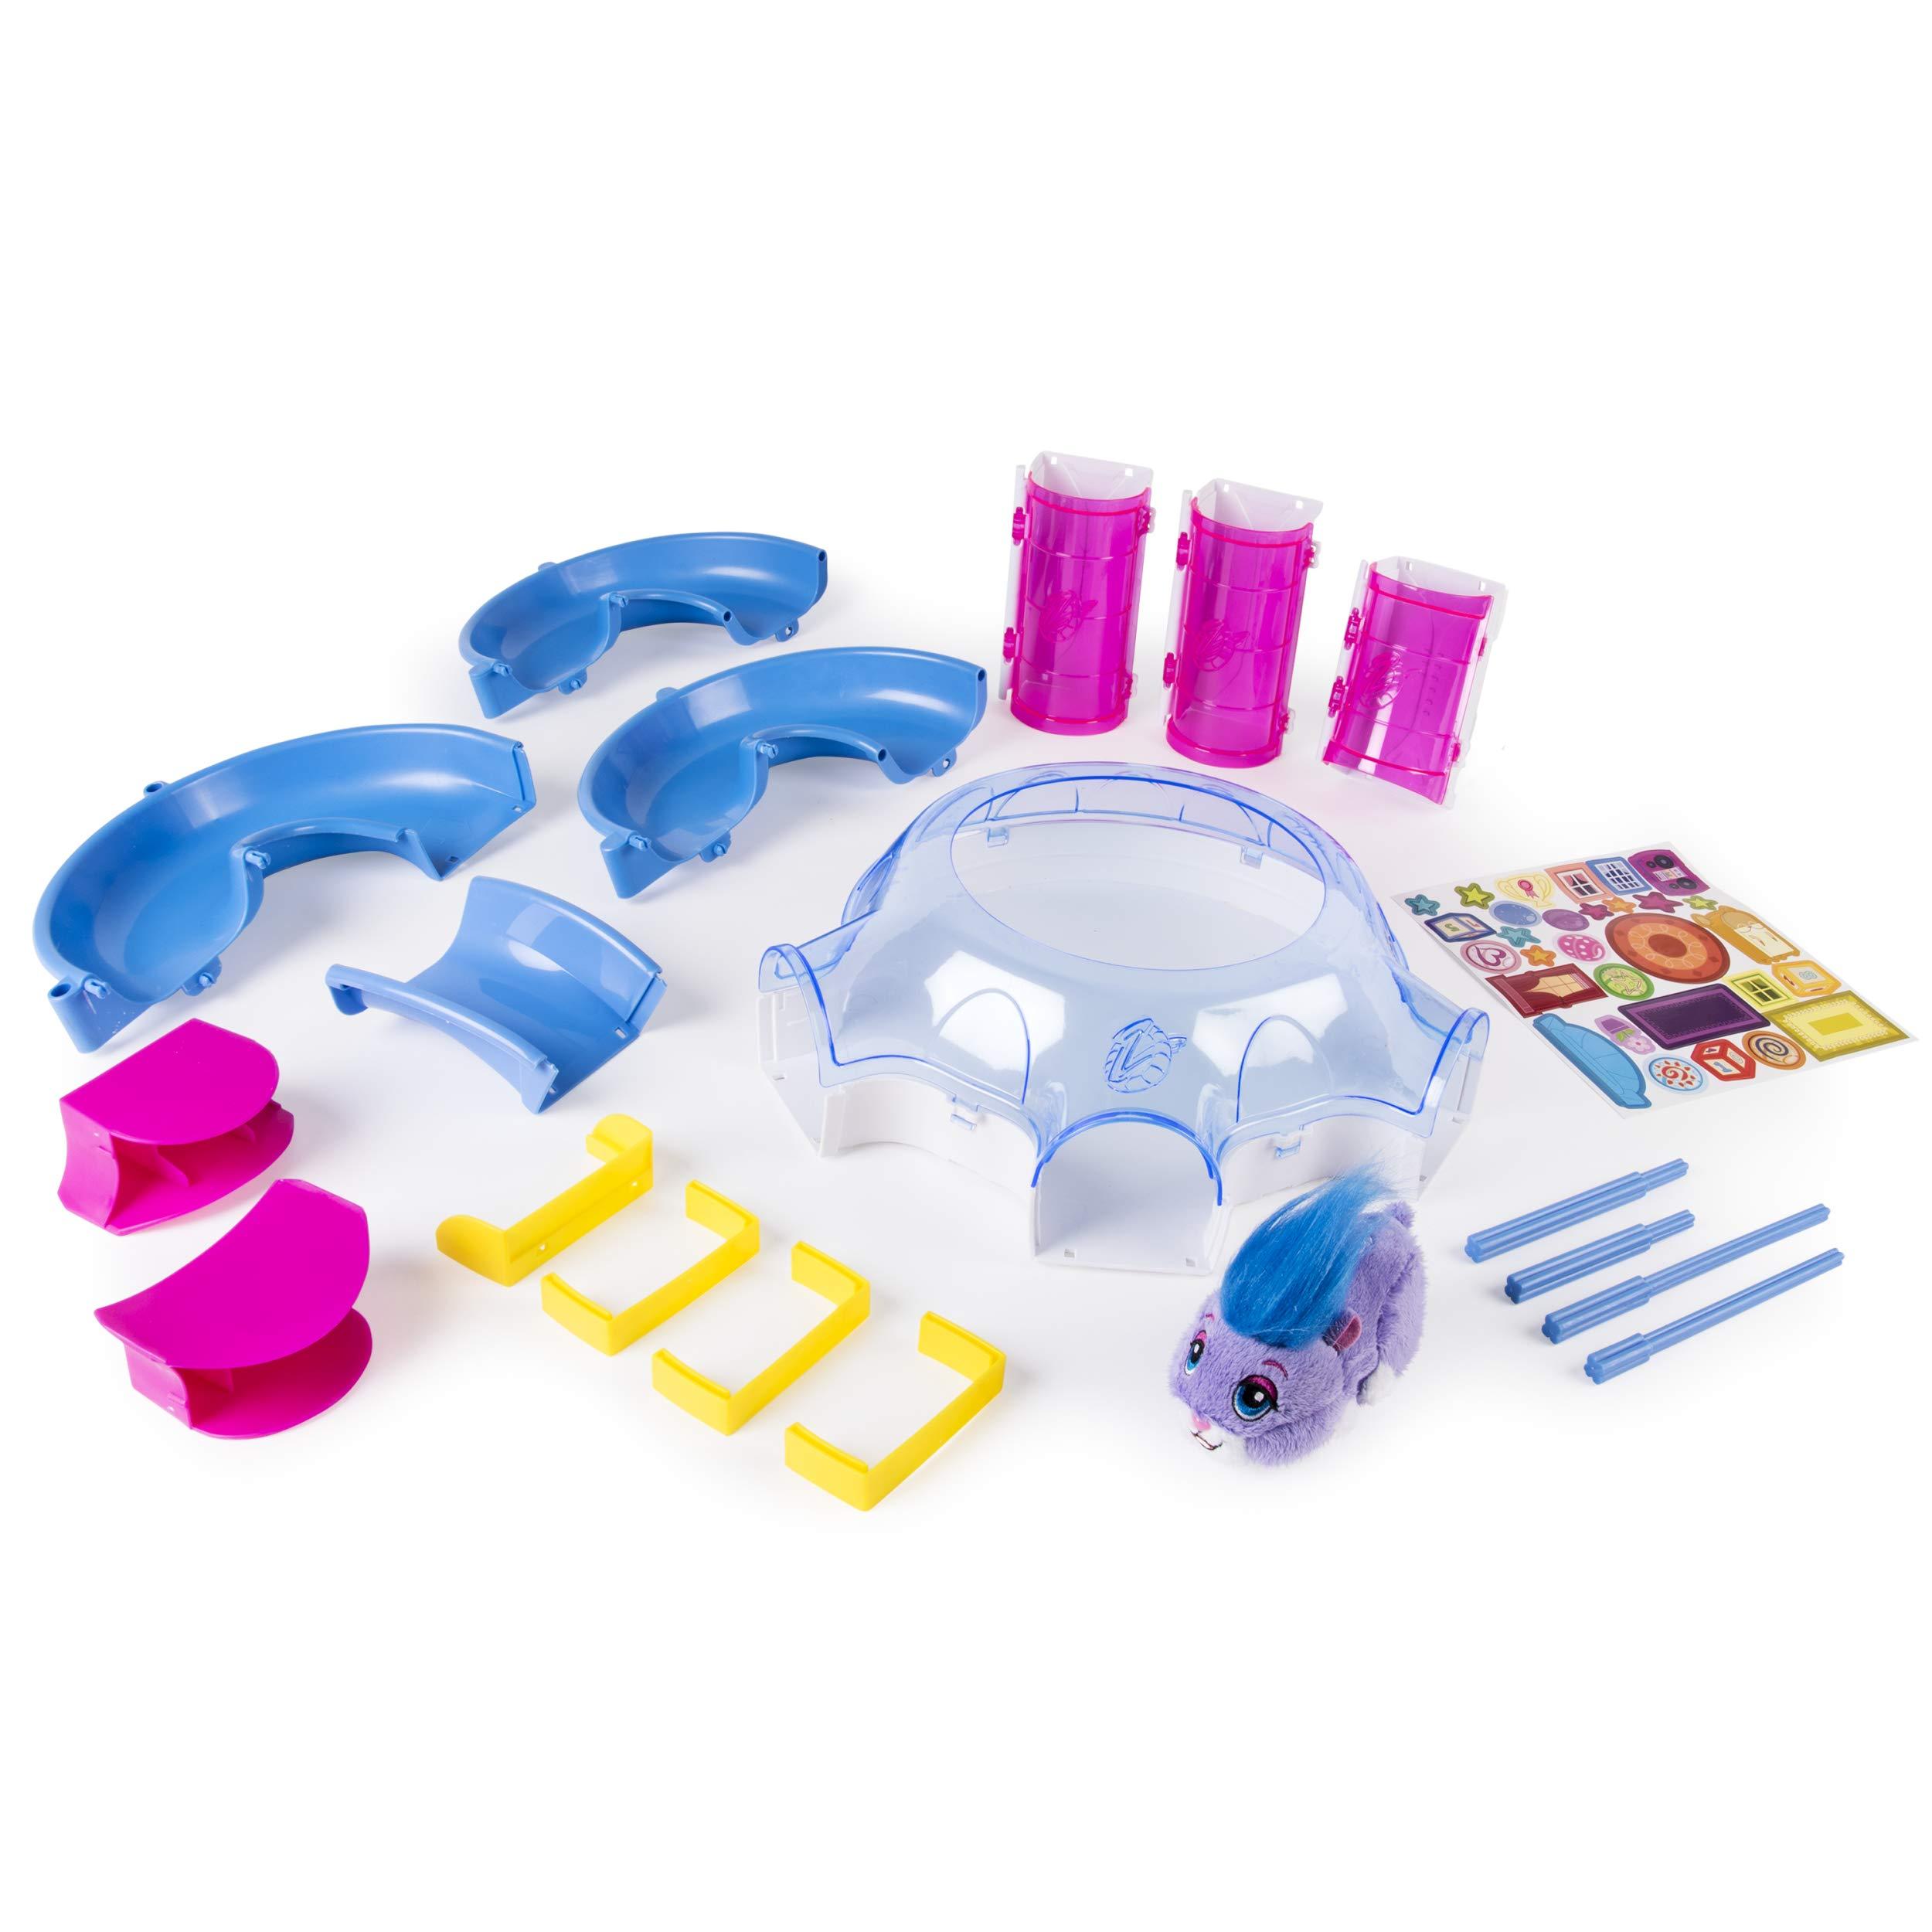 Zhu Zhu Pets – Hamster House Play Set with Slide and Tunnel - image 2 of 8